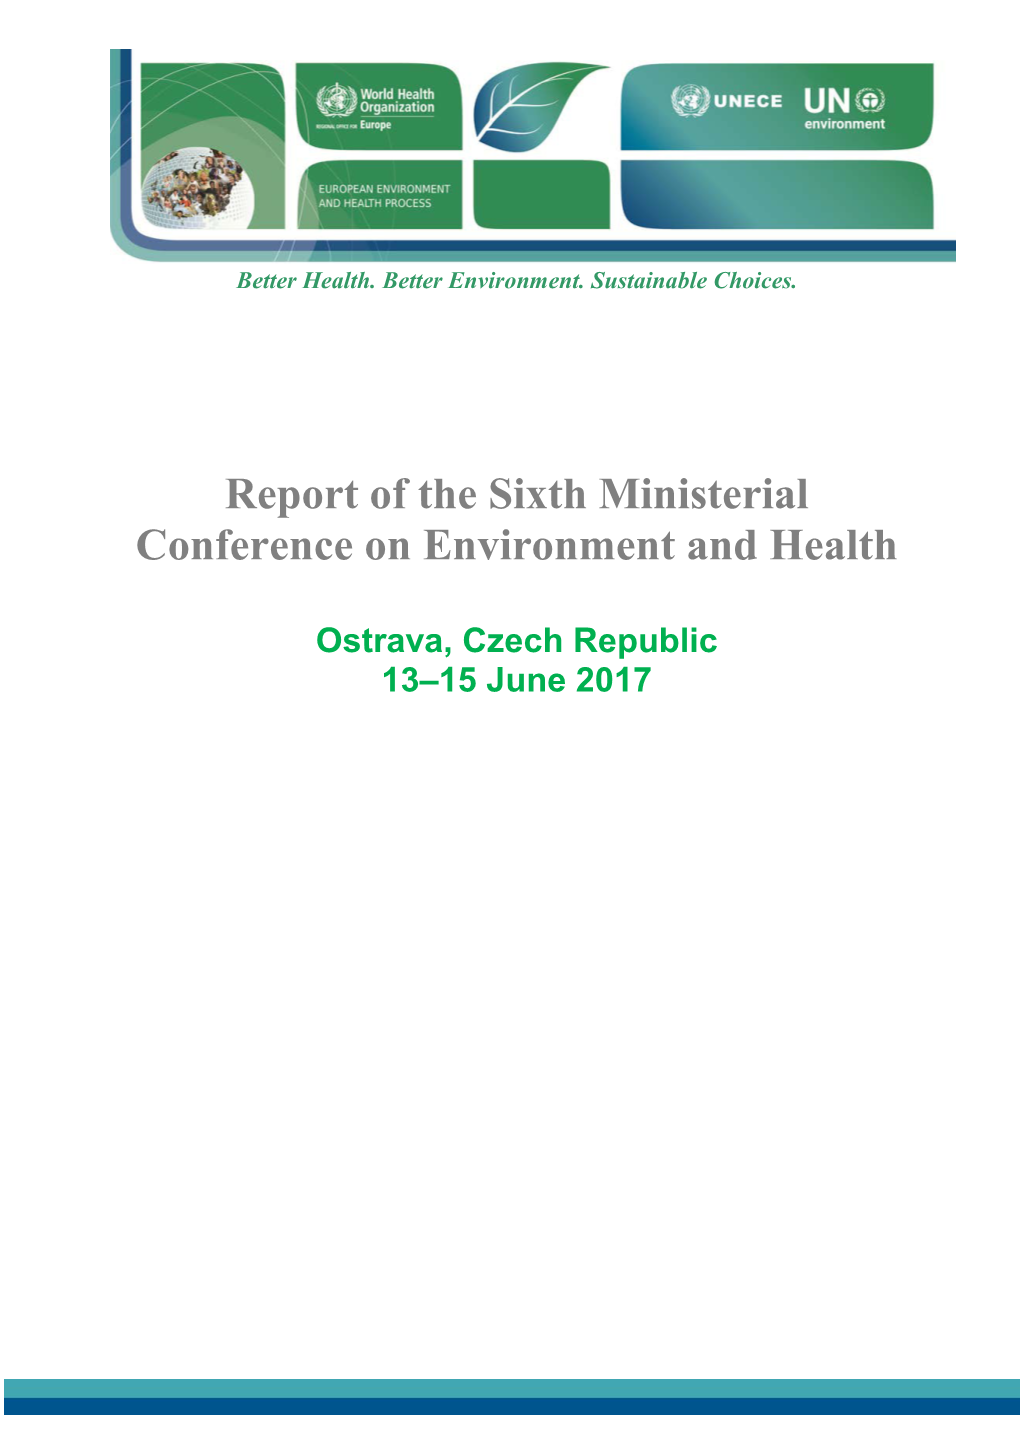 Report of the Sixth Ministerial Conference on Environment and Health